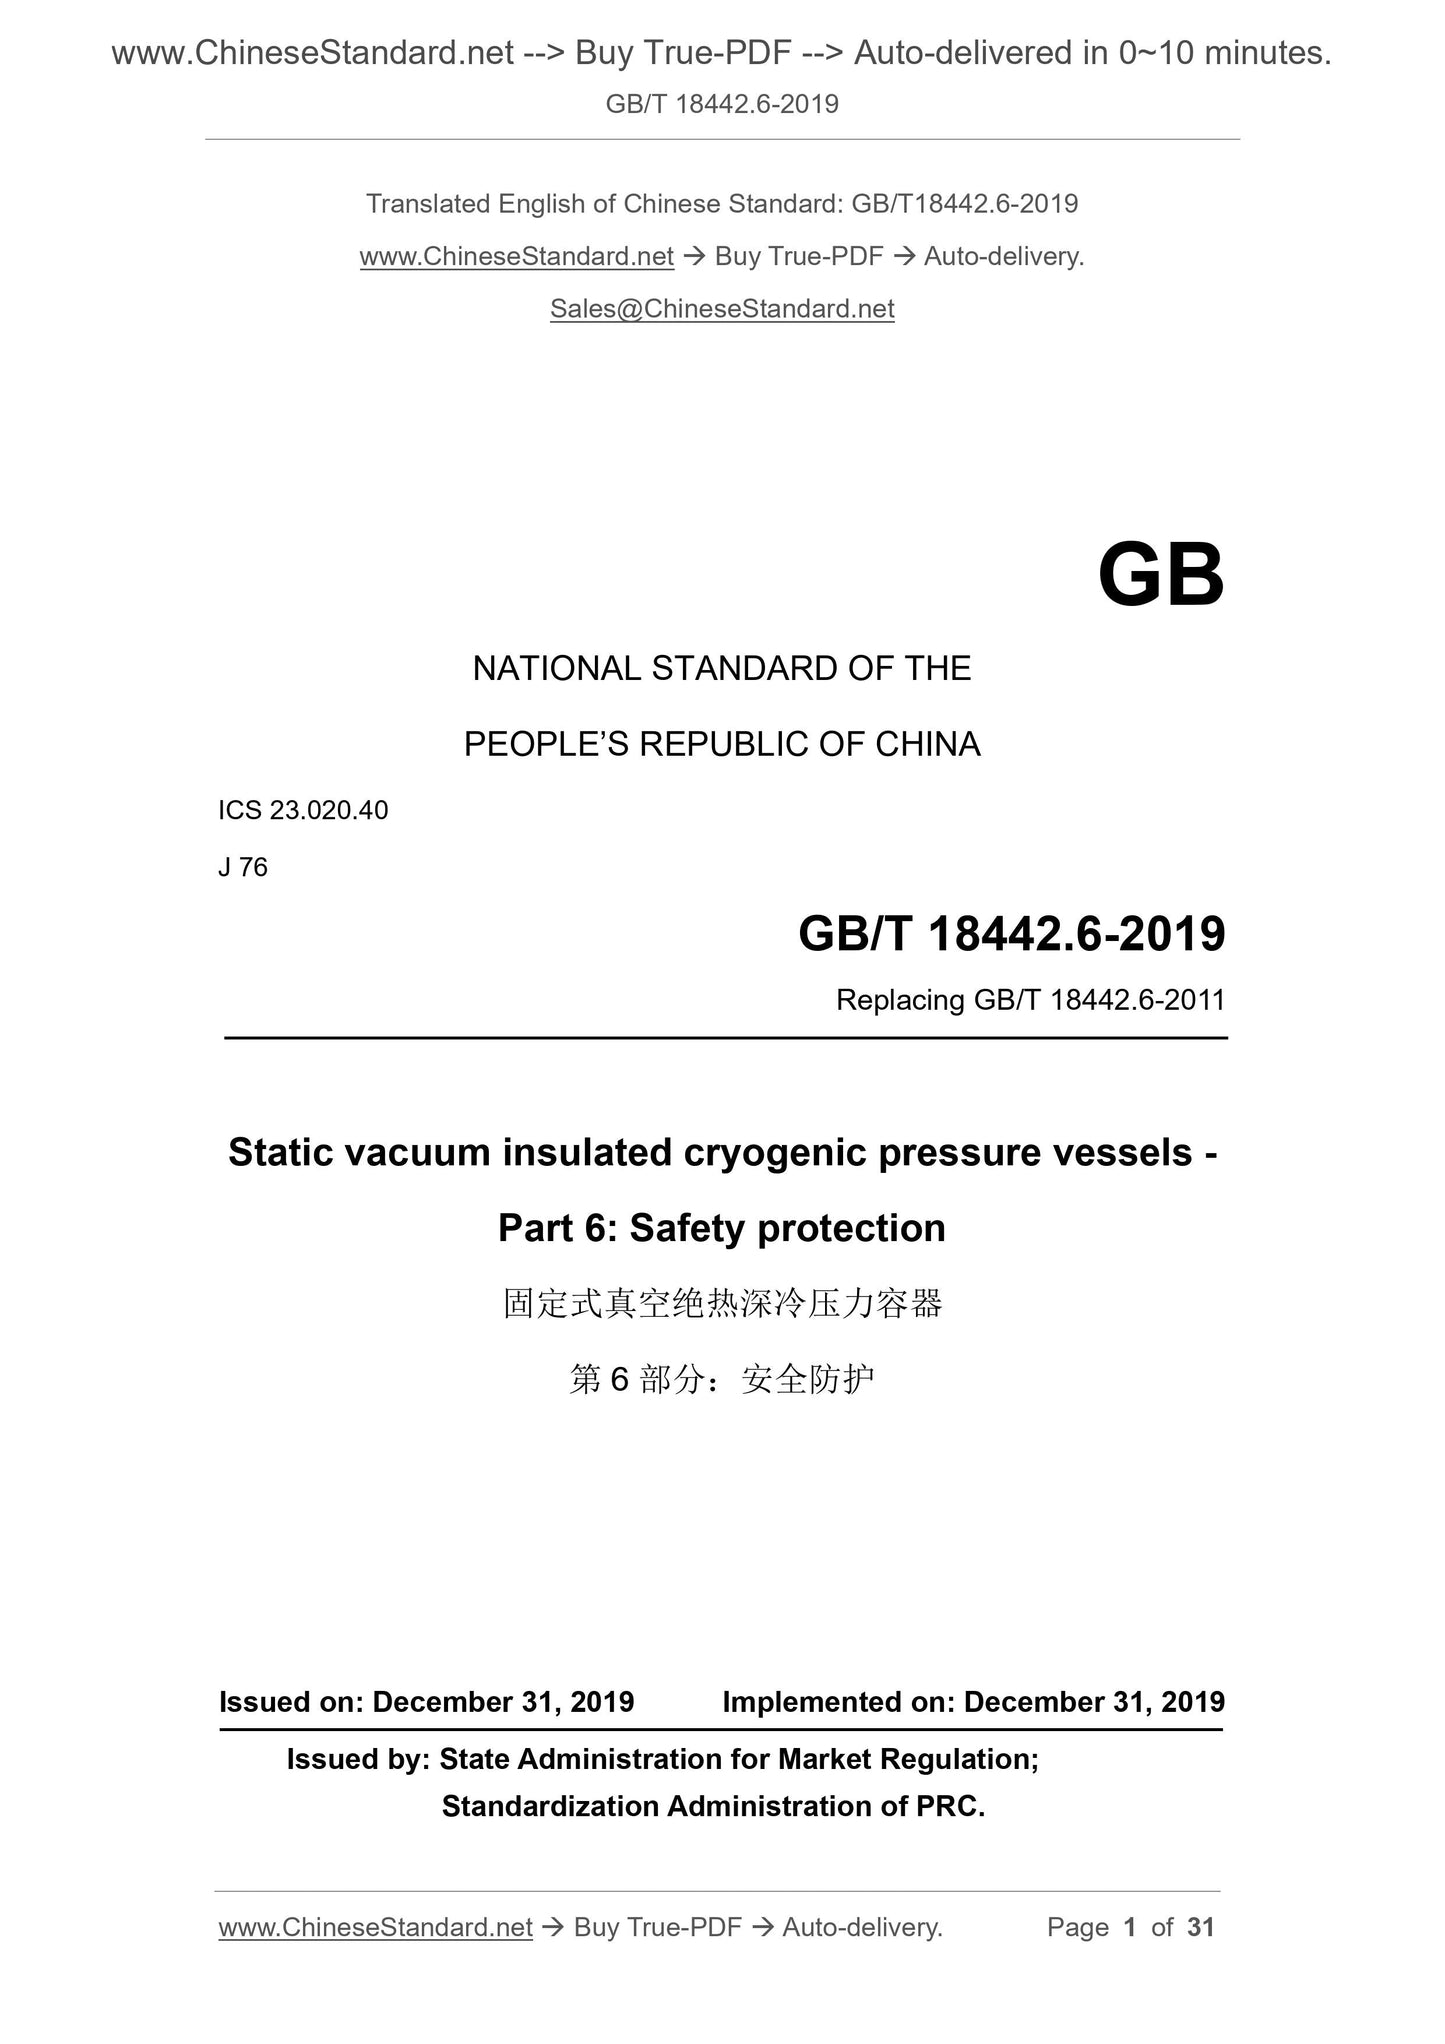 GB/T 18442.6-2019 Page 1